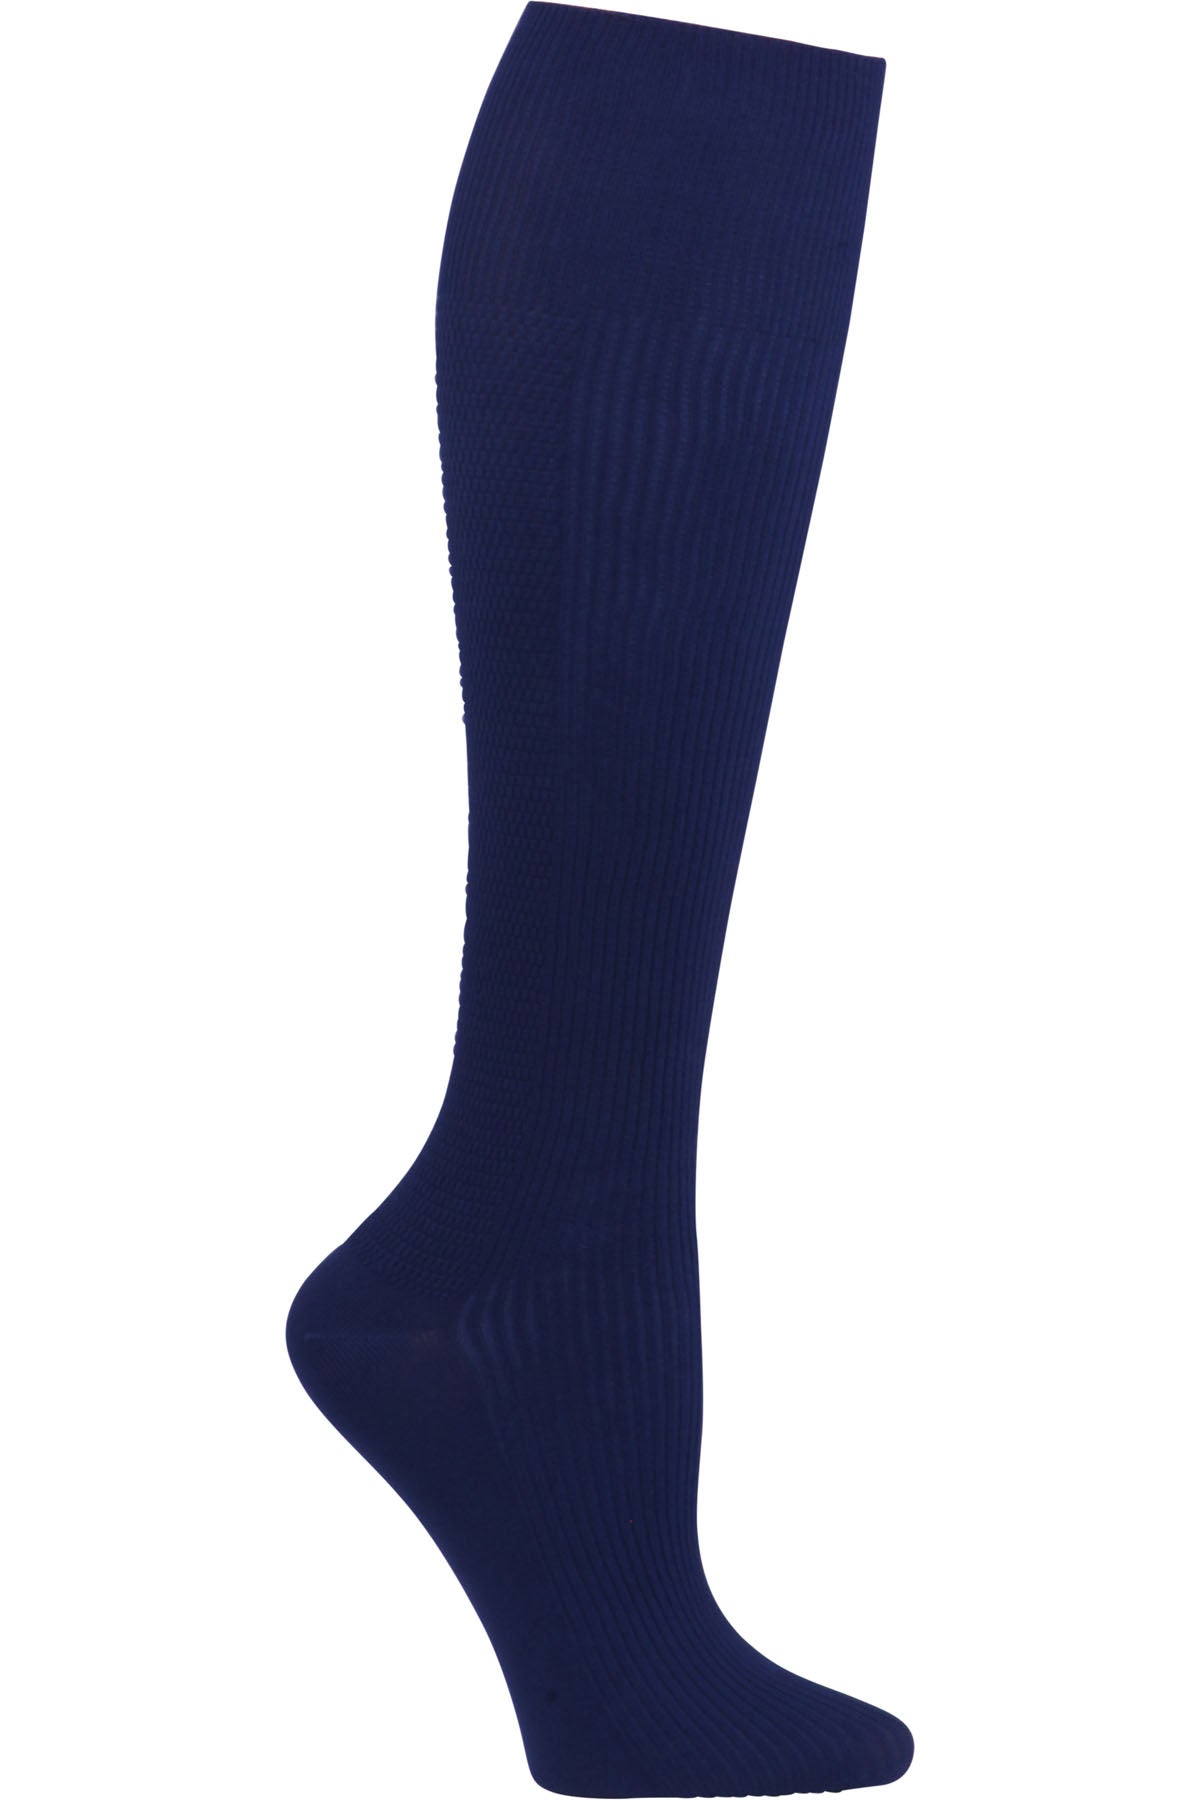 Cherokee Mens Support Socks 8-12 mmHg in Navy at Parker's Clothing and Shoes.